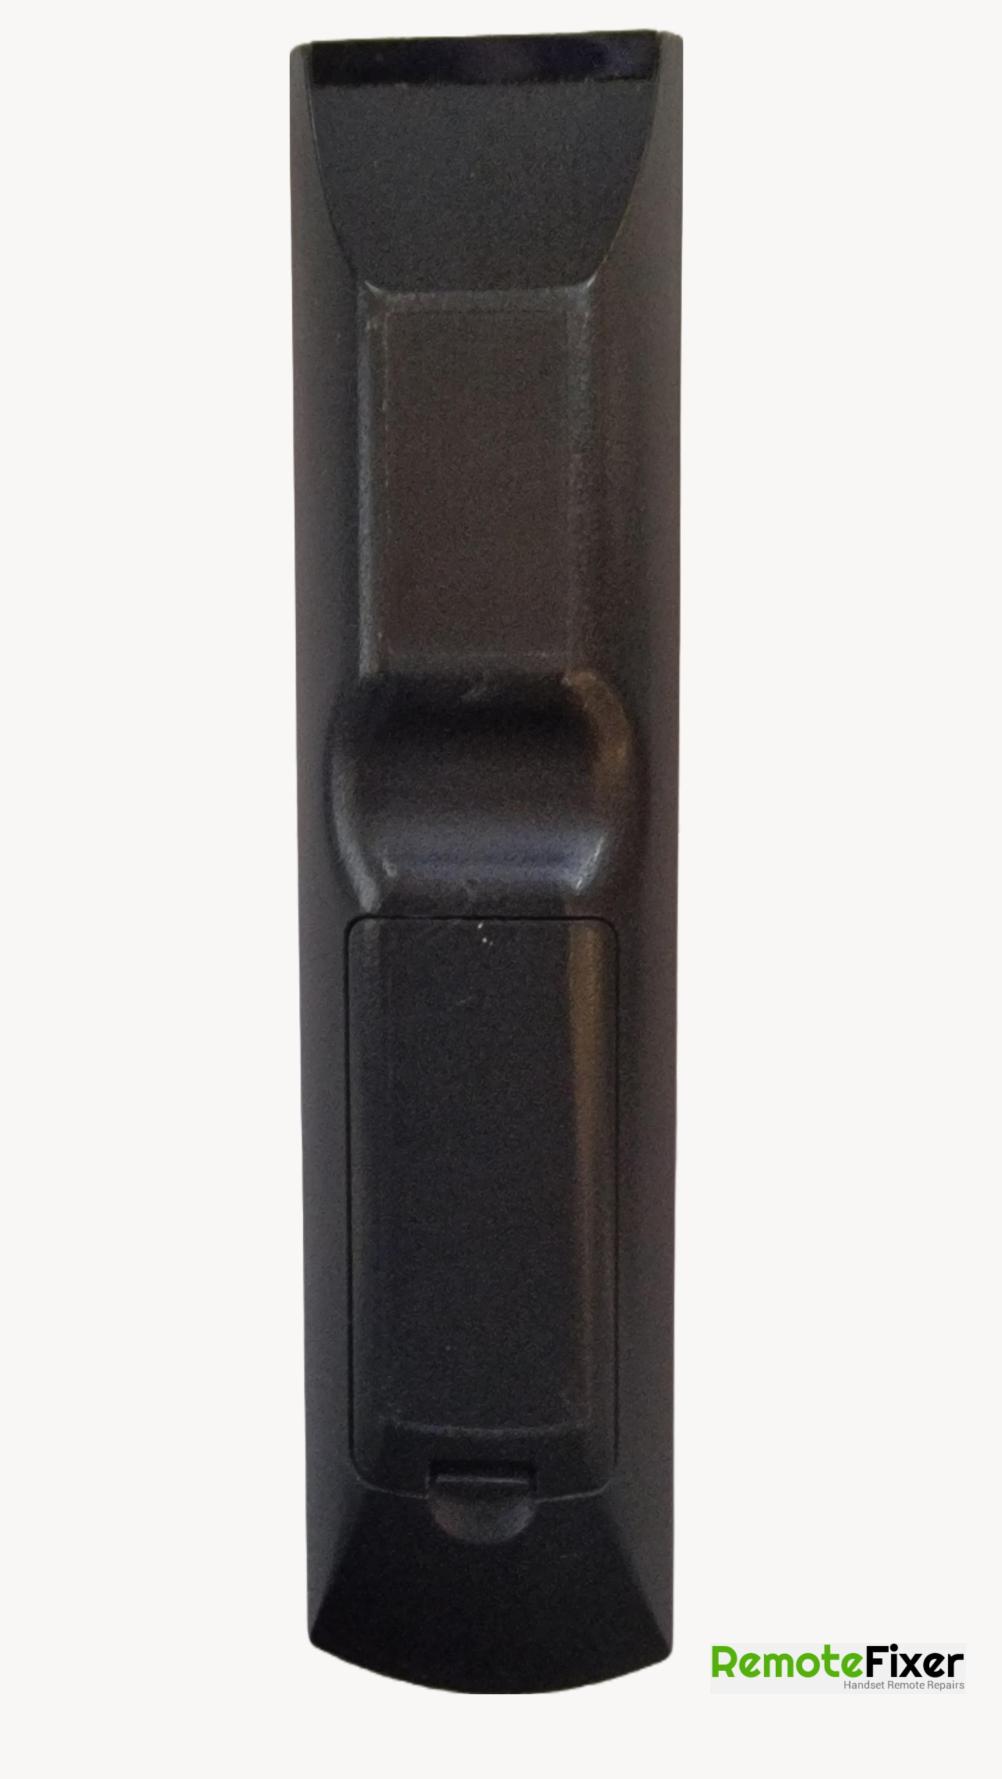 Sony RM-AAP005 Remote Control - Back Image